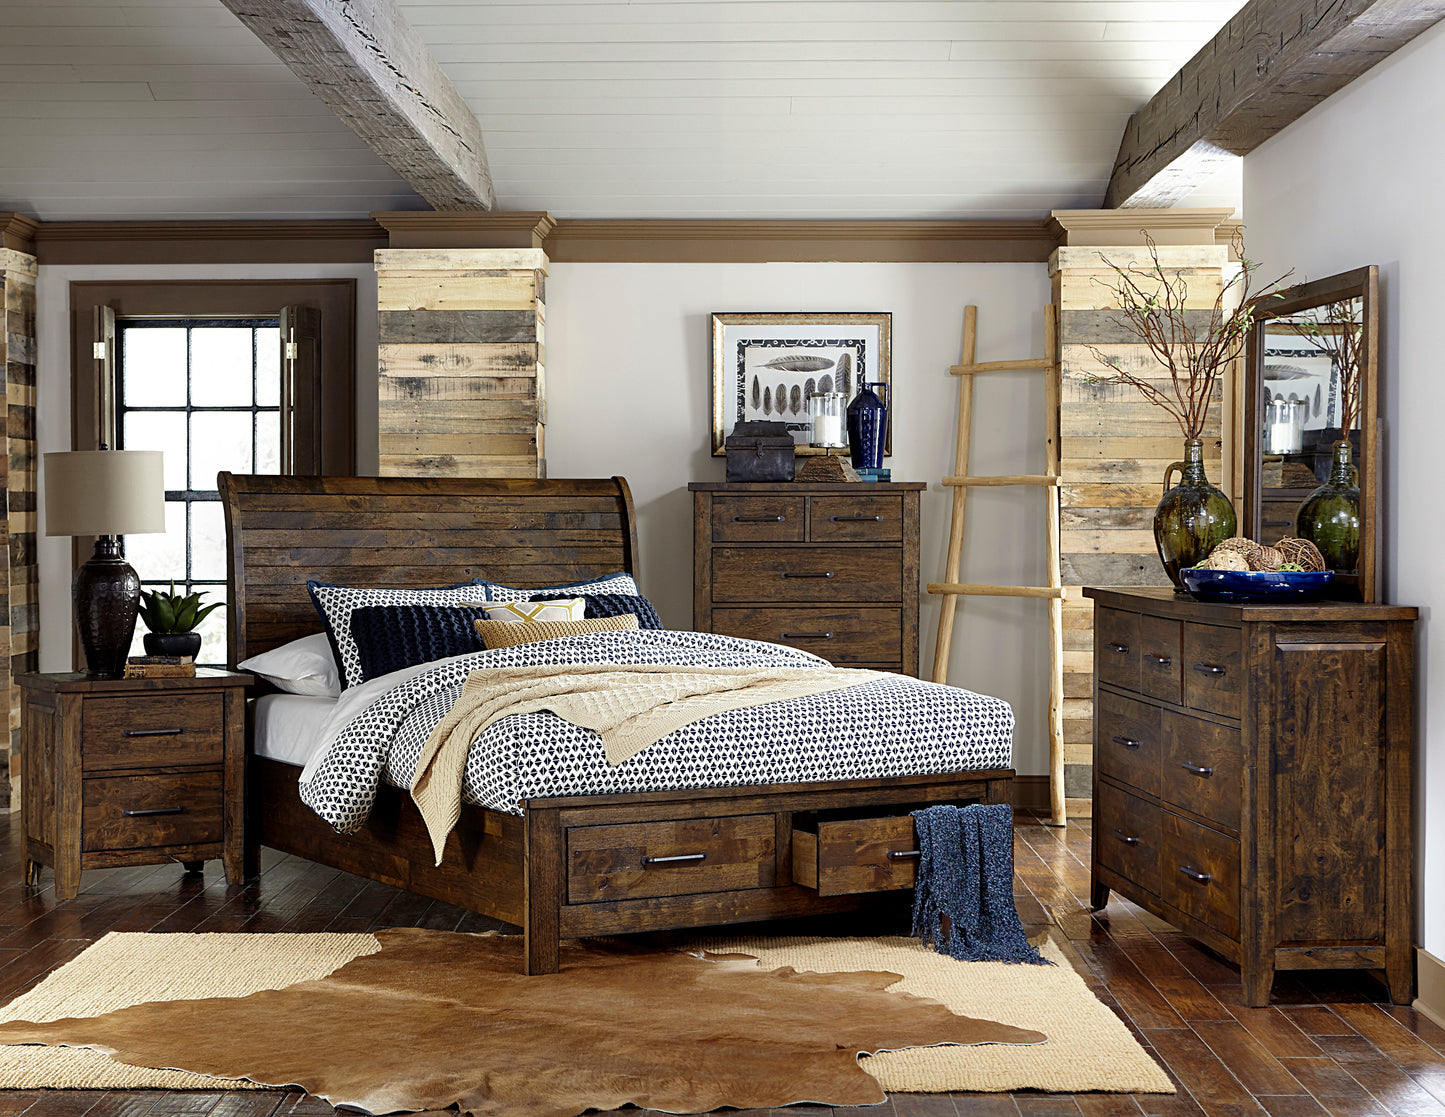 Jacoby Rustic 5PC Bedroom Set E King Sleigh Storage Bed, Dresser, Mirror, Nightstand, Chest in Country Brown